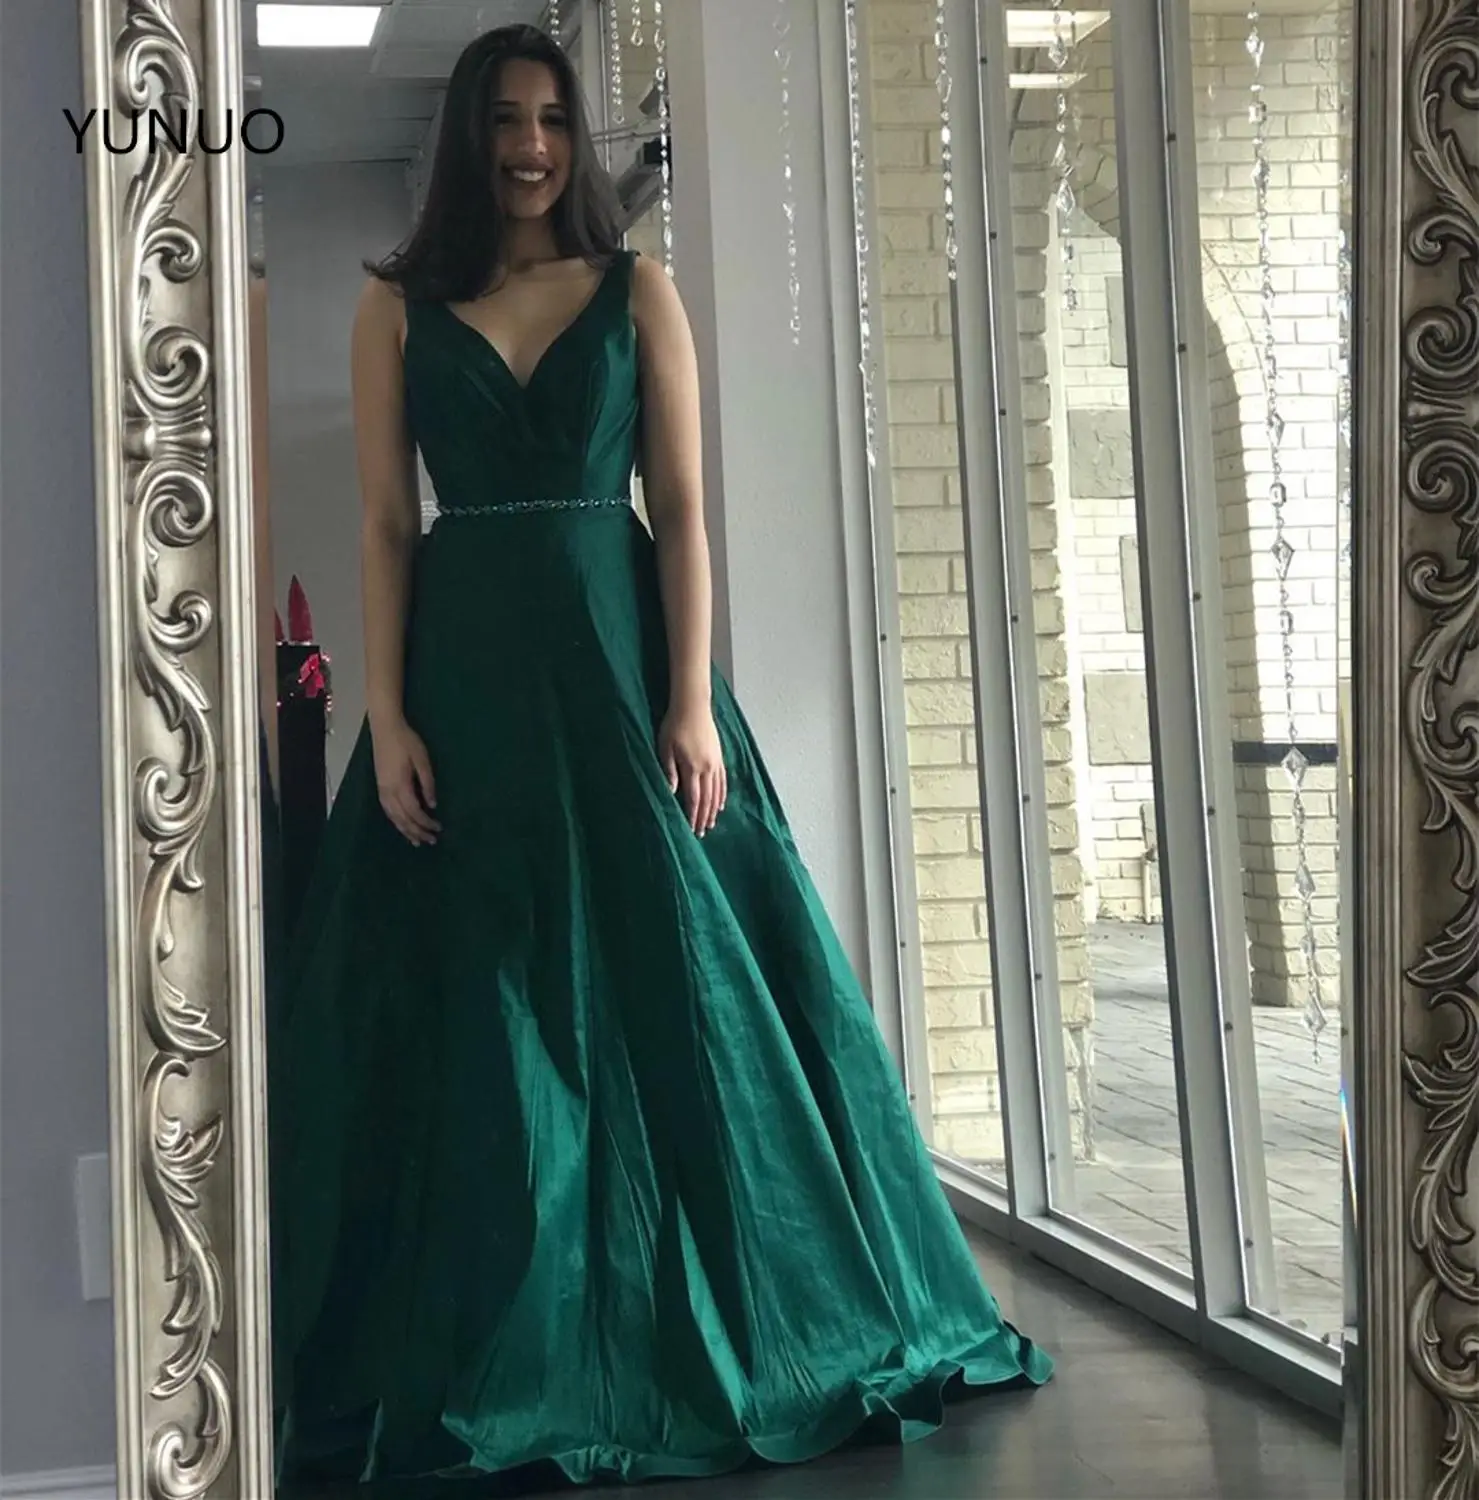 

YUNUO Gorgeous Emerald Satin Prom Pageant Dresses V-neck Sleeveless Party Gowns Crystals Belt vestidos Formal Evening Wear